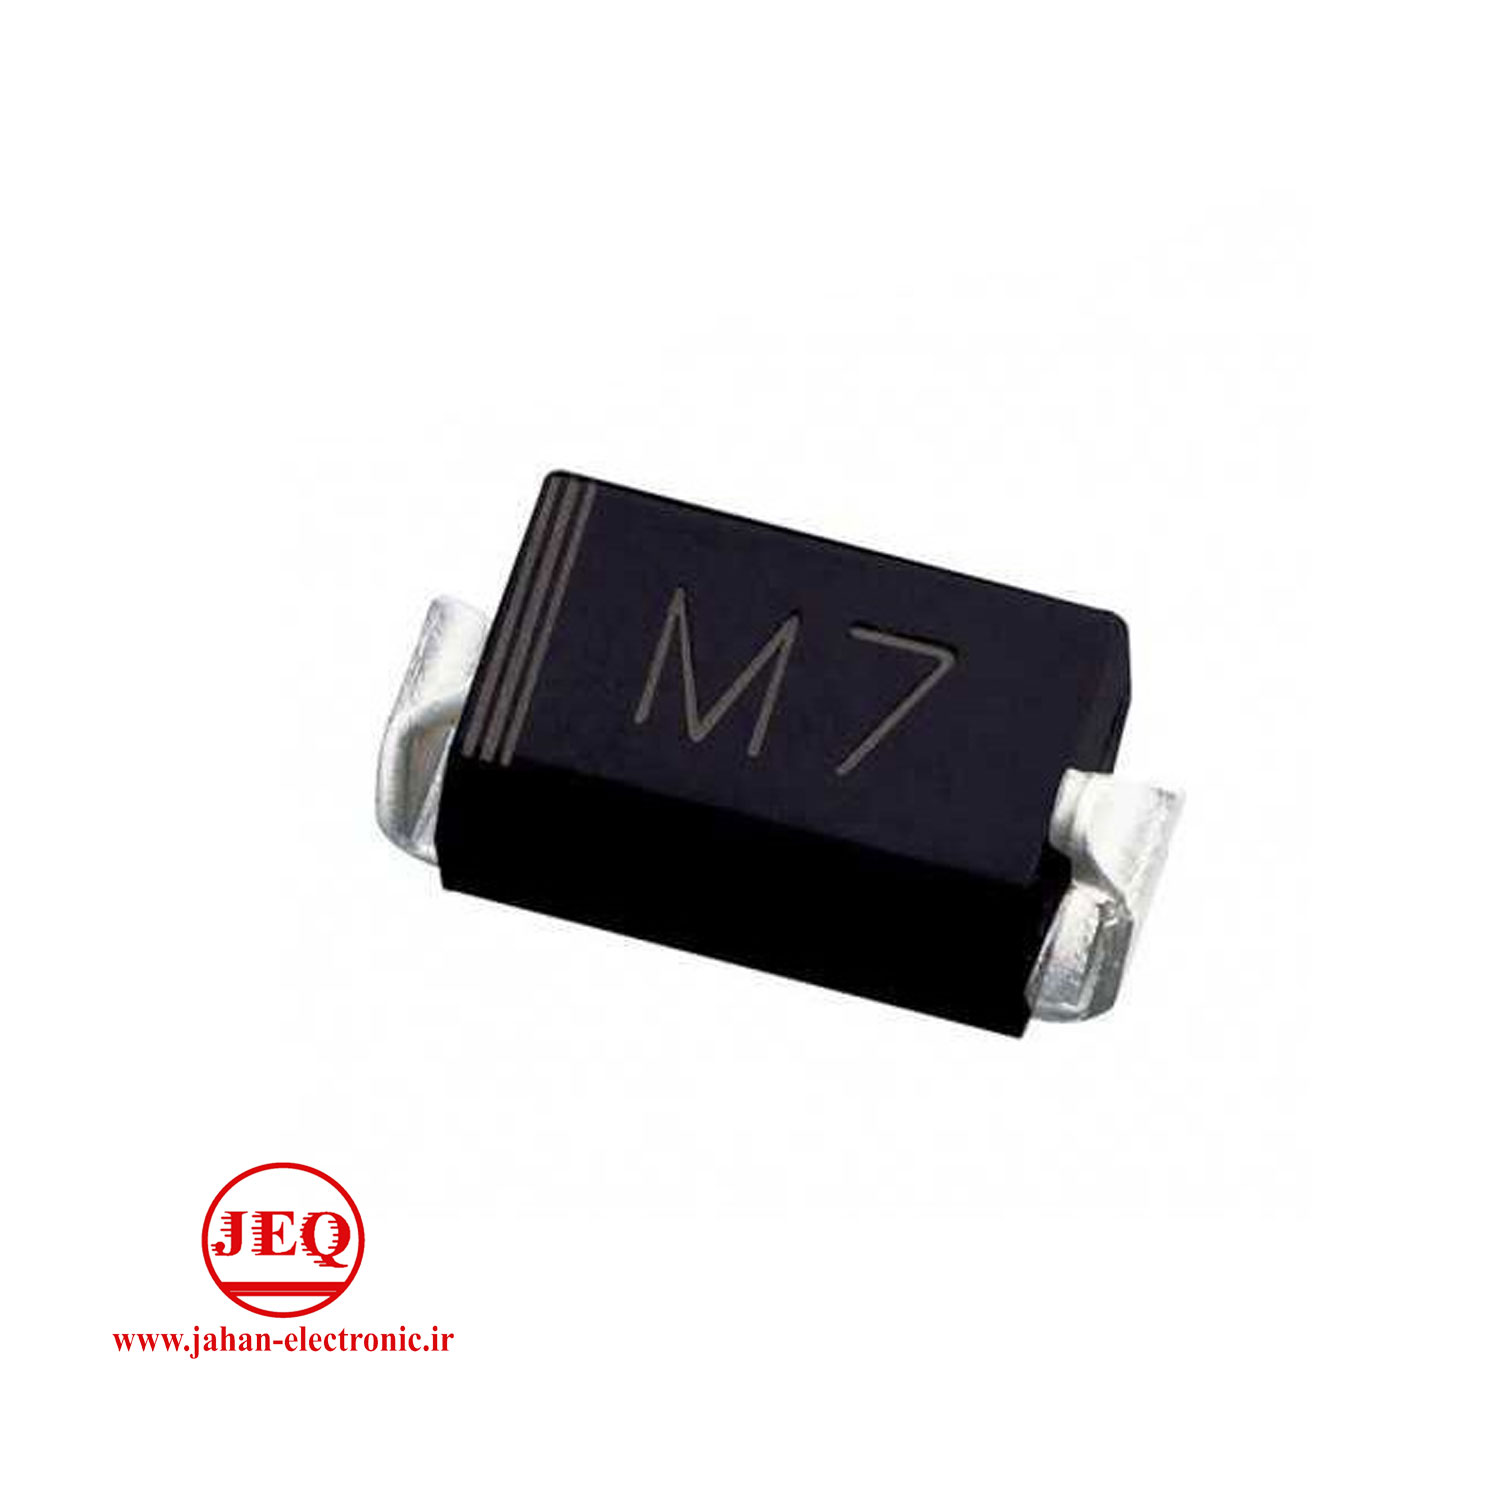 DIODE 1N4007 M7 smd